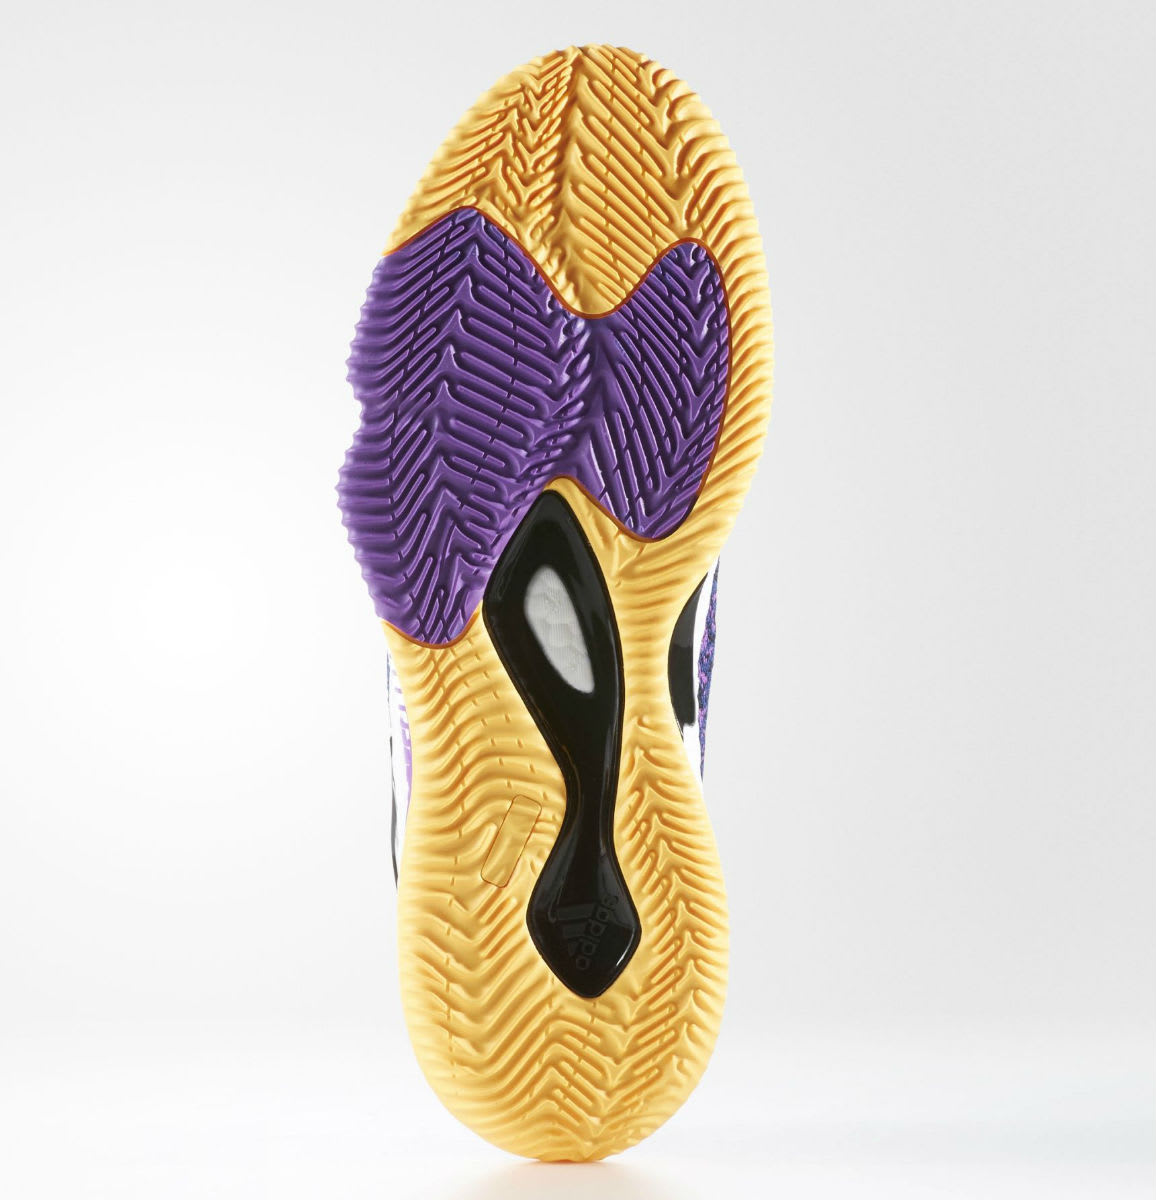 Adidas Crazylight Boost Swaggy P Lakers Sole BB8175